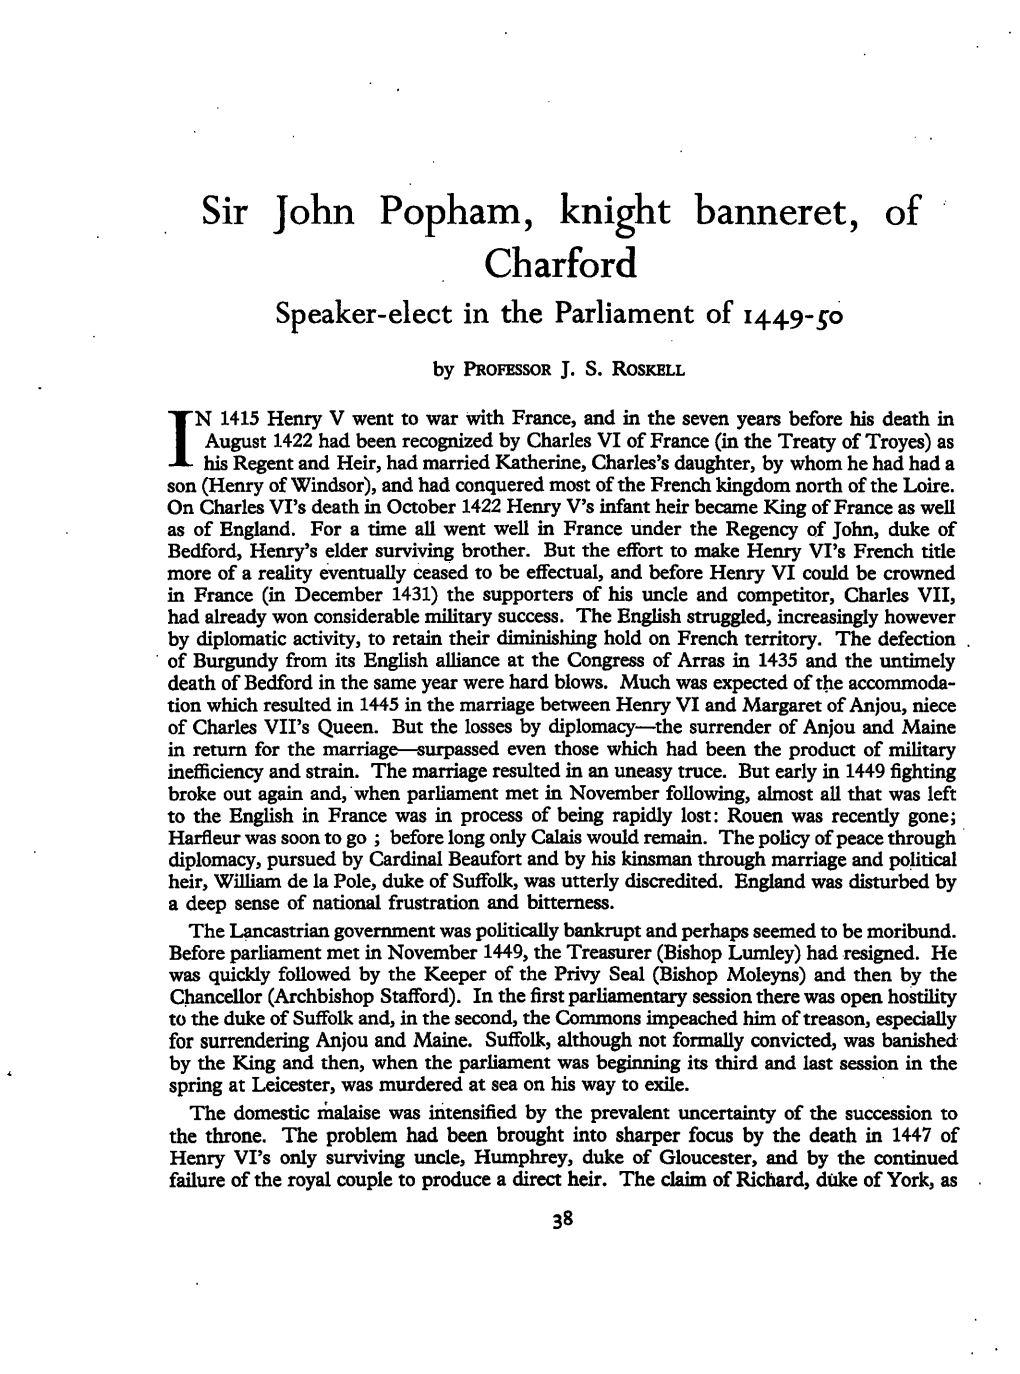 Sir John Popham, Knight Banneret, of Charford Speaker-Elect in the Parliament of 1449-50